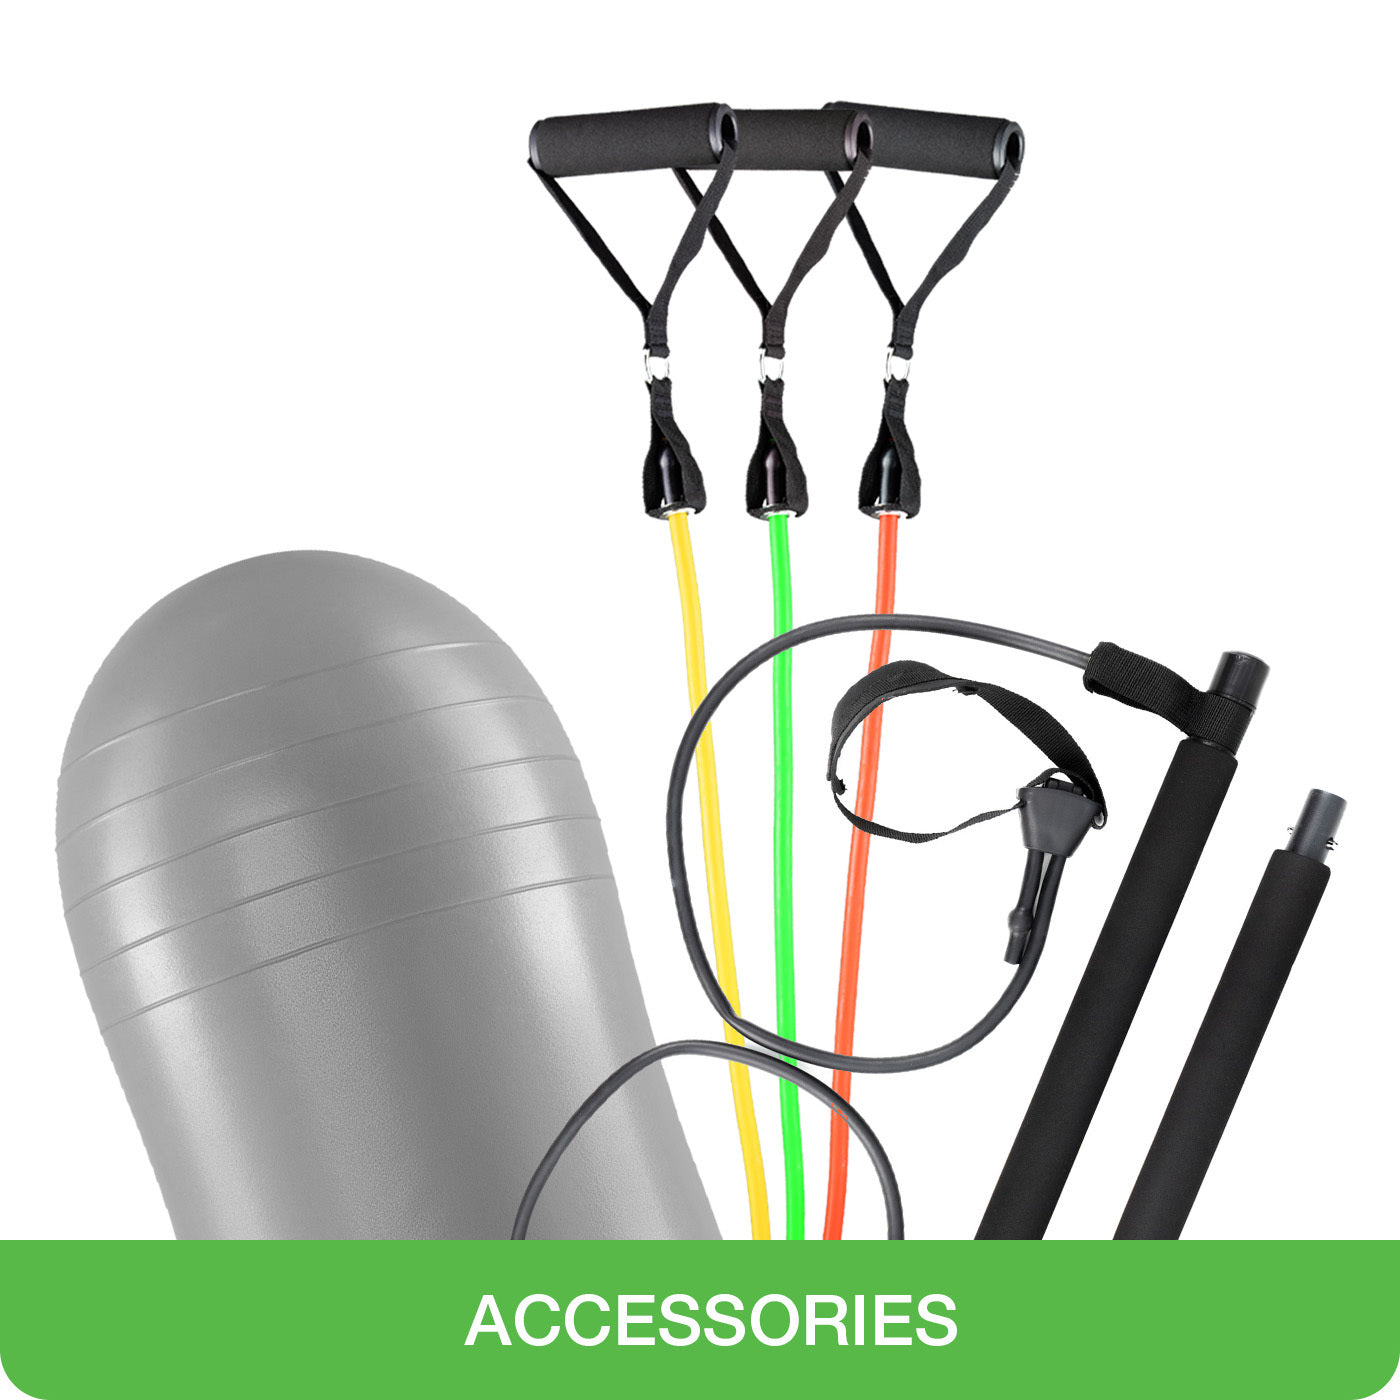 accessories for vibro plate: yoga ball, resistance bands, pilates bar